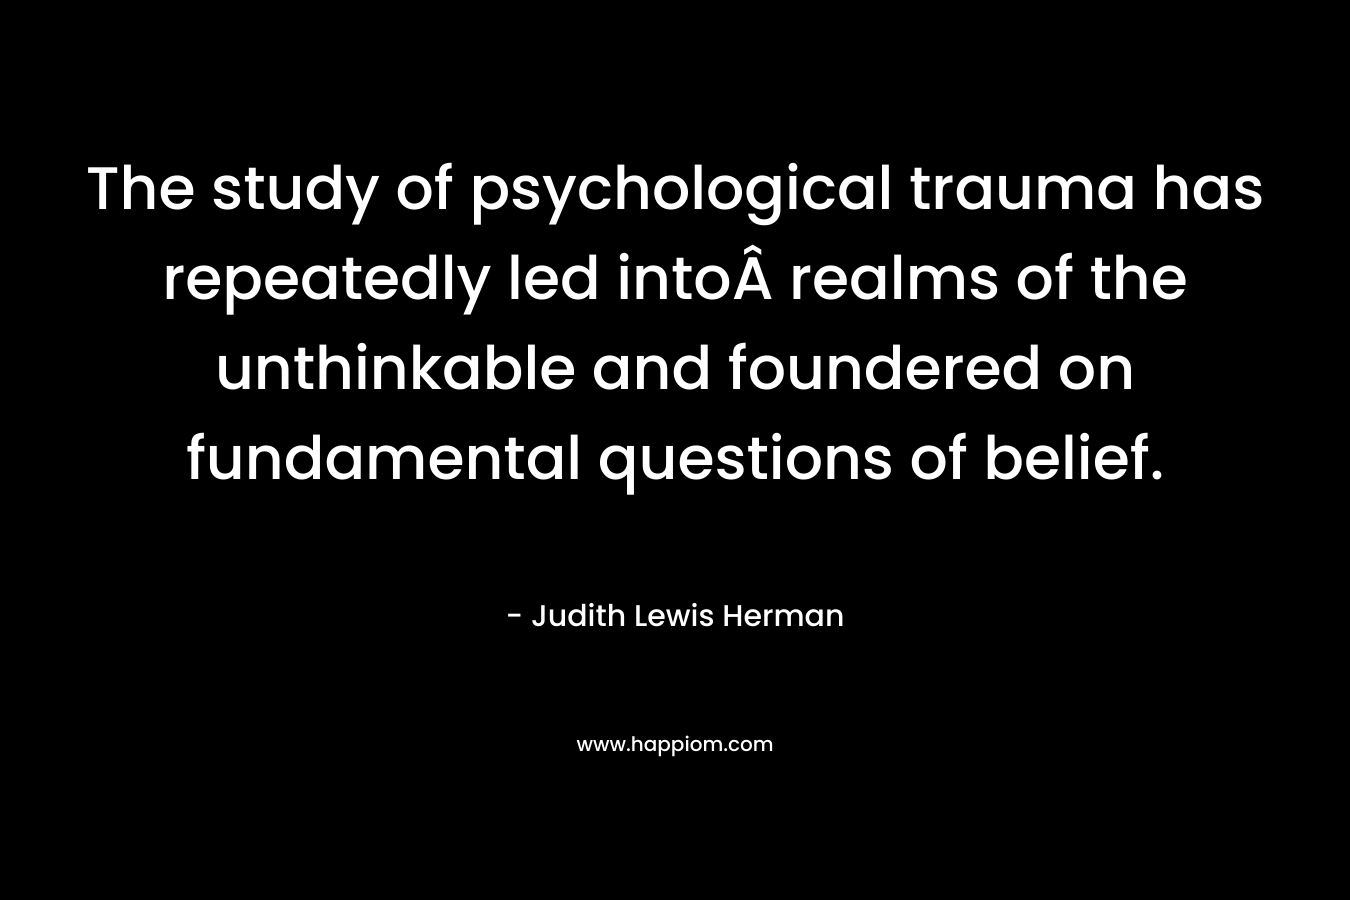 The study of psychological trauma has repeatedly led intoÂ realms of the unthinkable and foundered on fundamental questions of belief. – Judith Lewis Herman